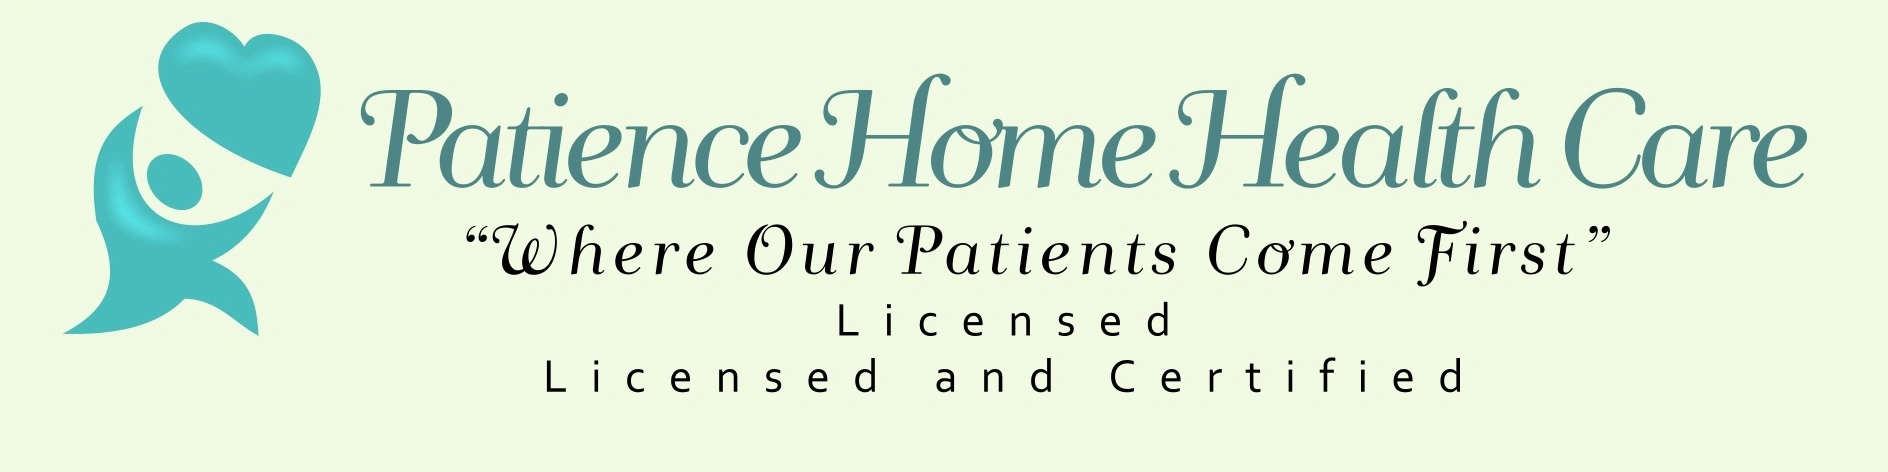 Patience Home Health Care